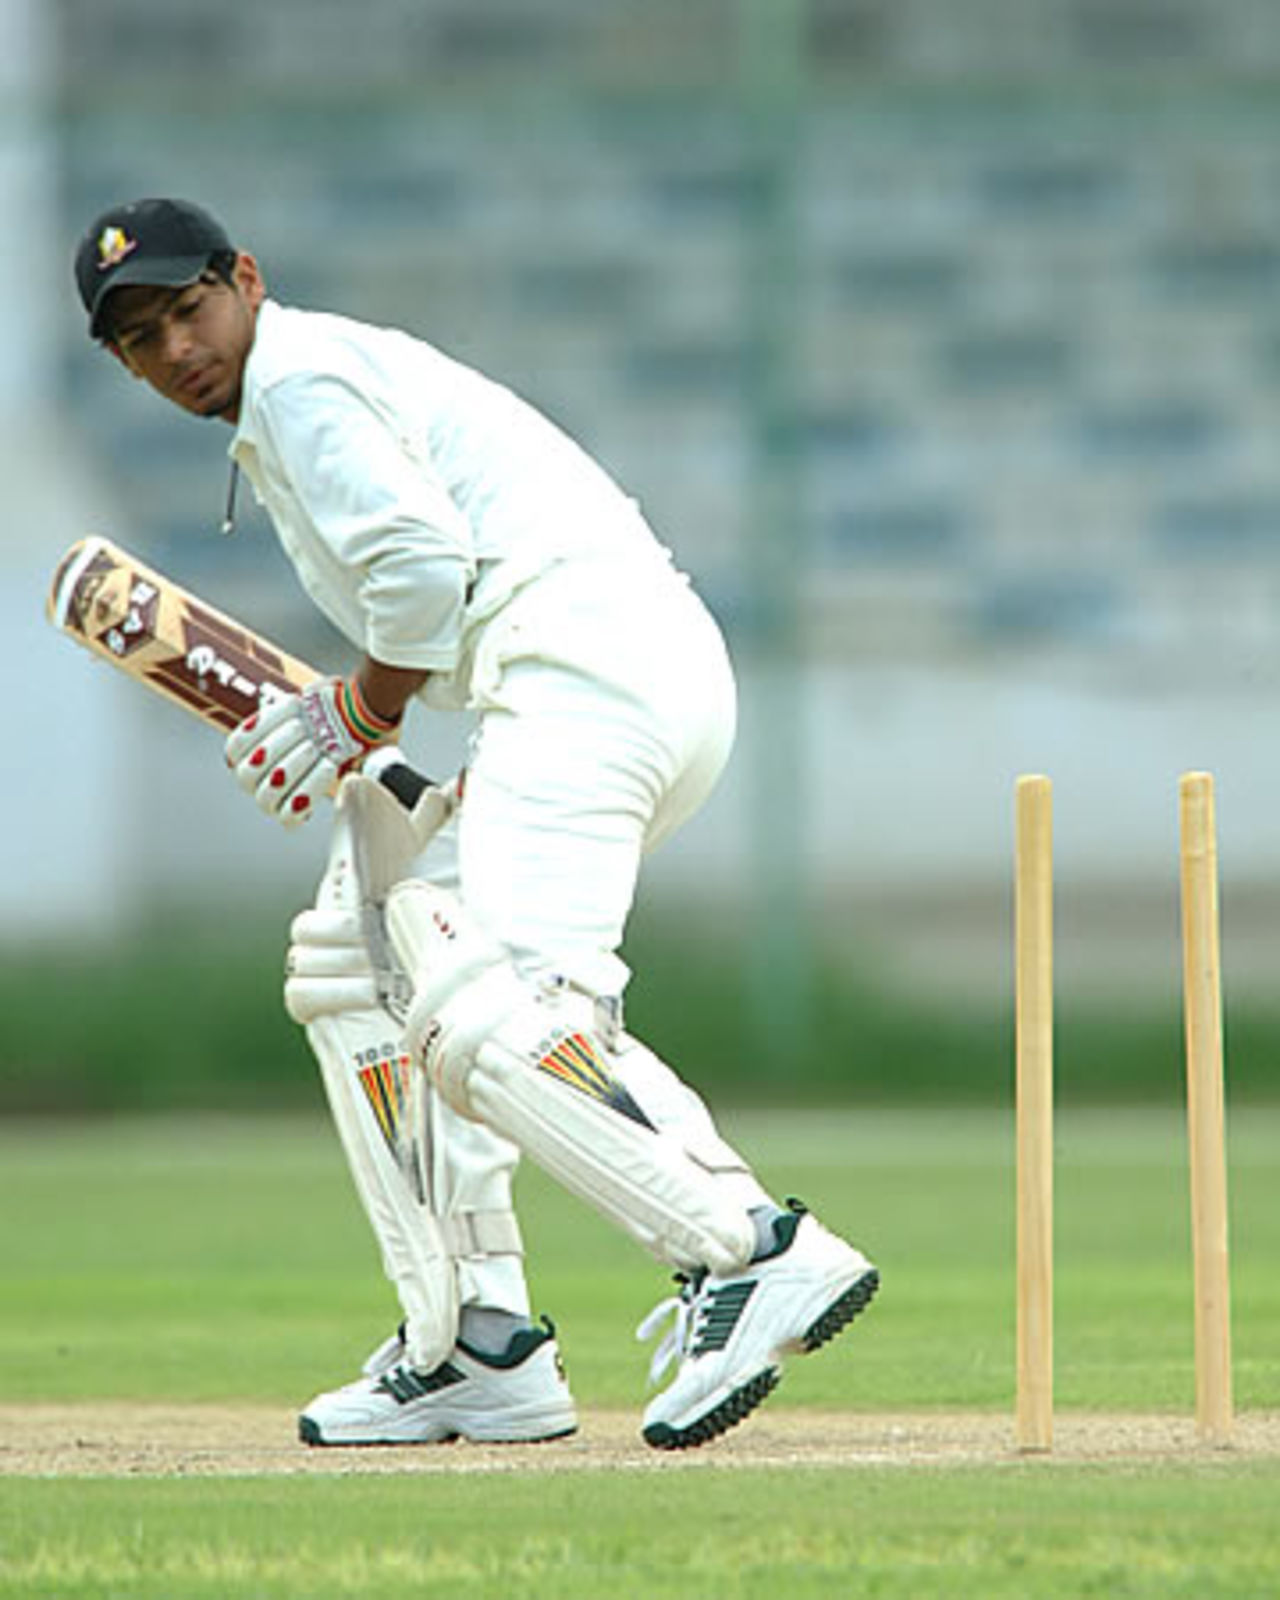 Umar Shah of UAE looks back as his middle stump is knocked out, Nepal Under-19s v United Arab Emirates Under-19s at National Stadium Karachi, Youth Asia Cup 2003, 20 July 2003.